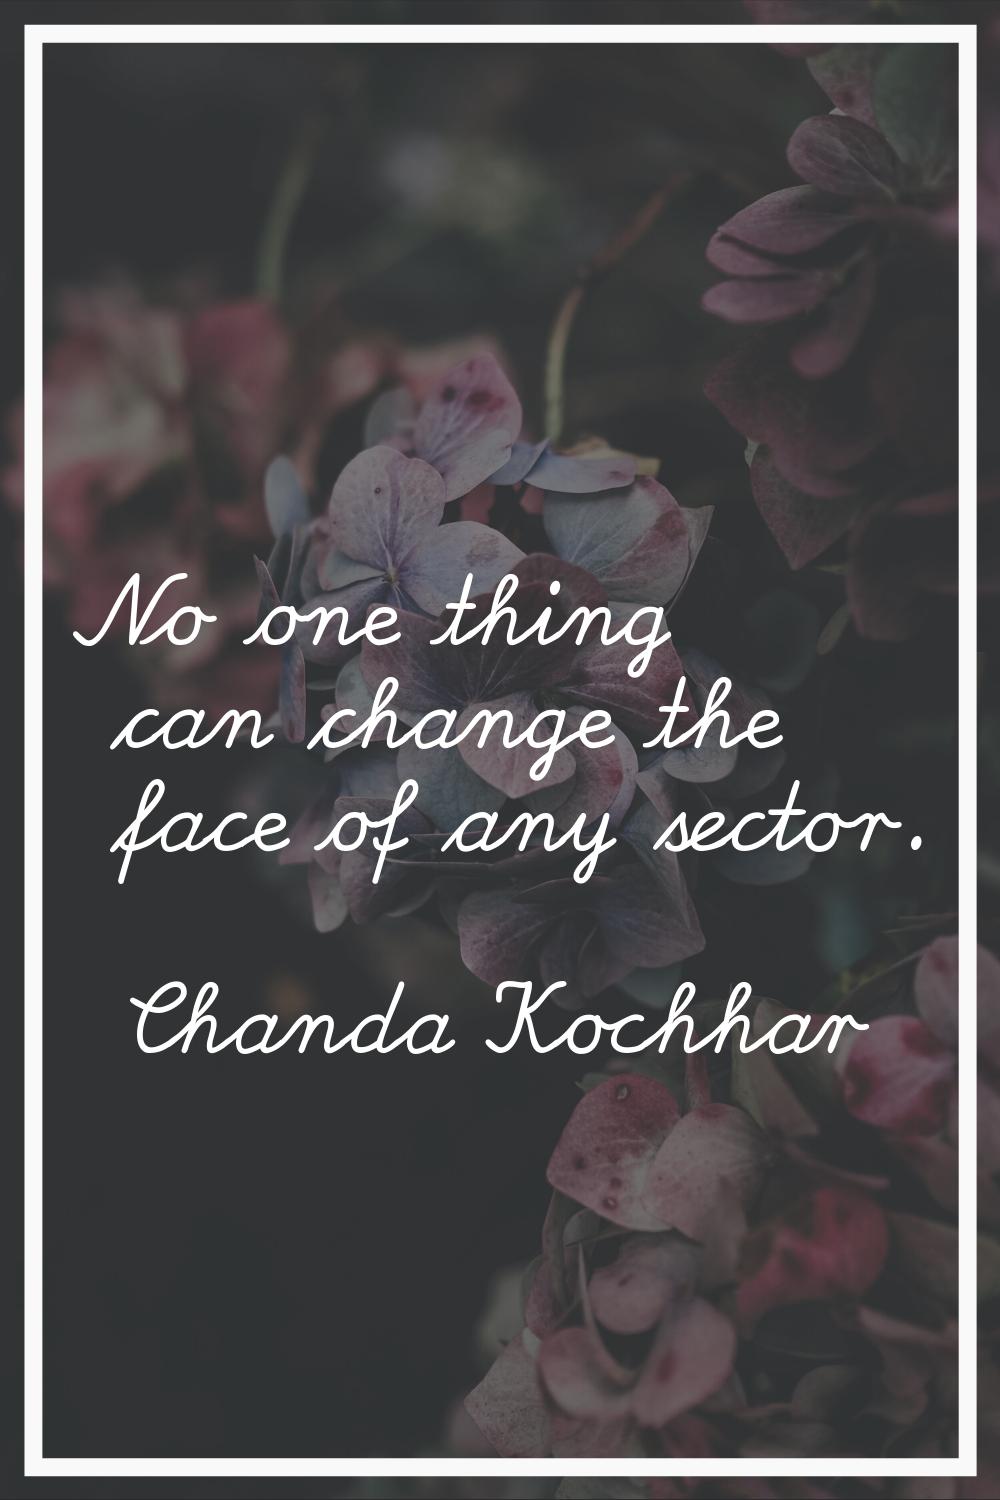 No one thing can change the face of any sector.